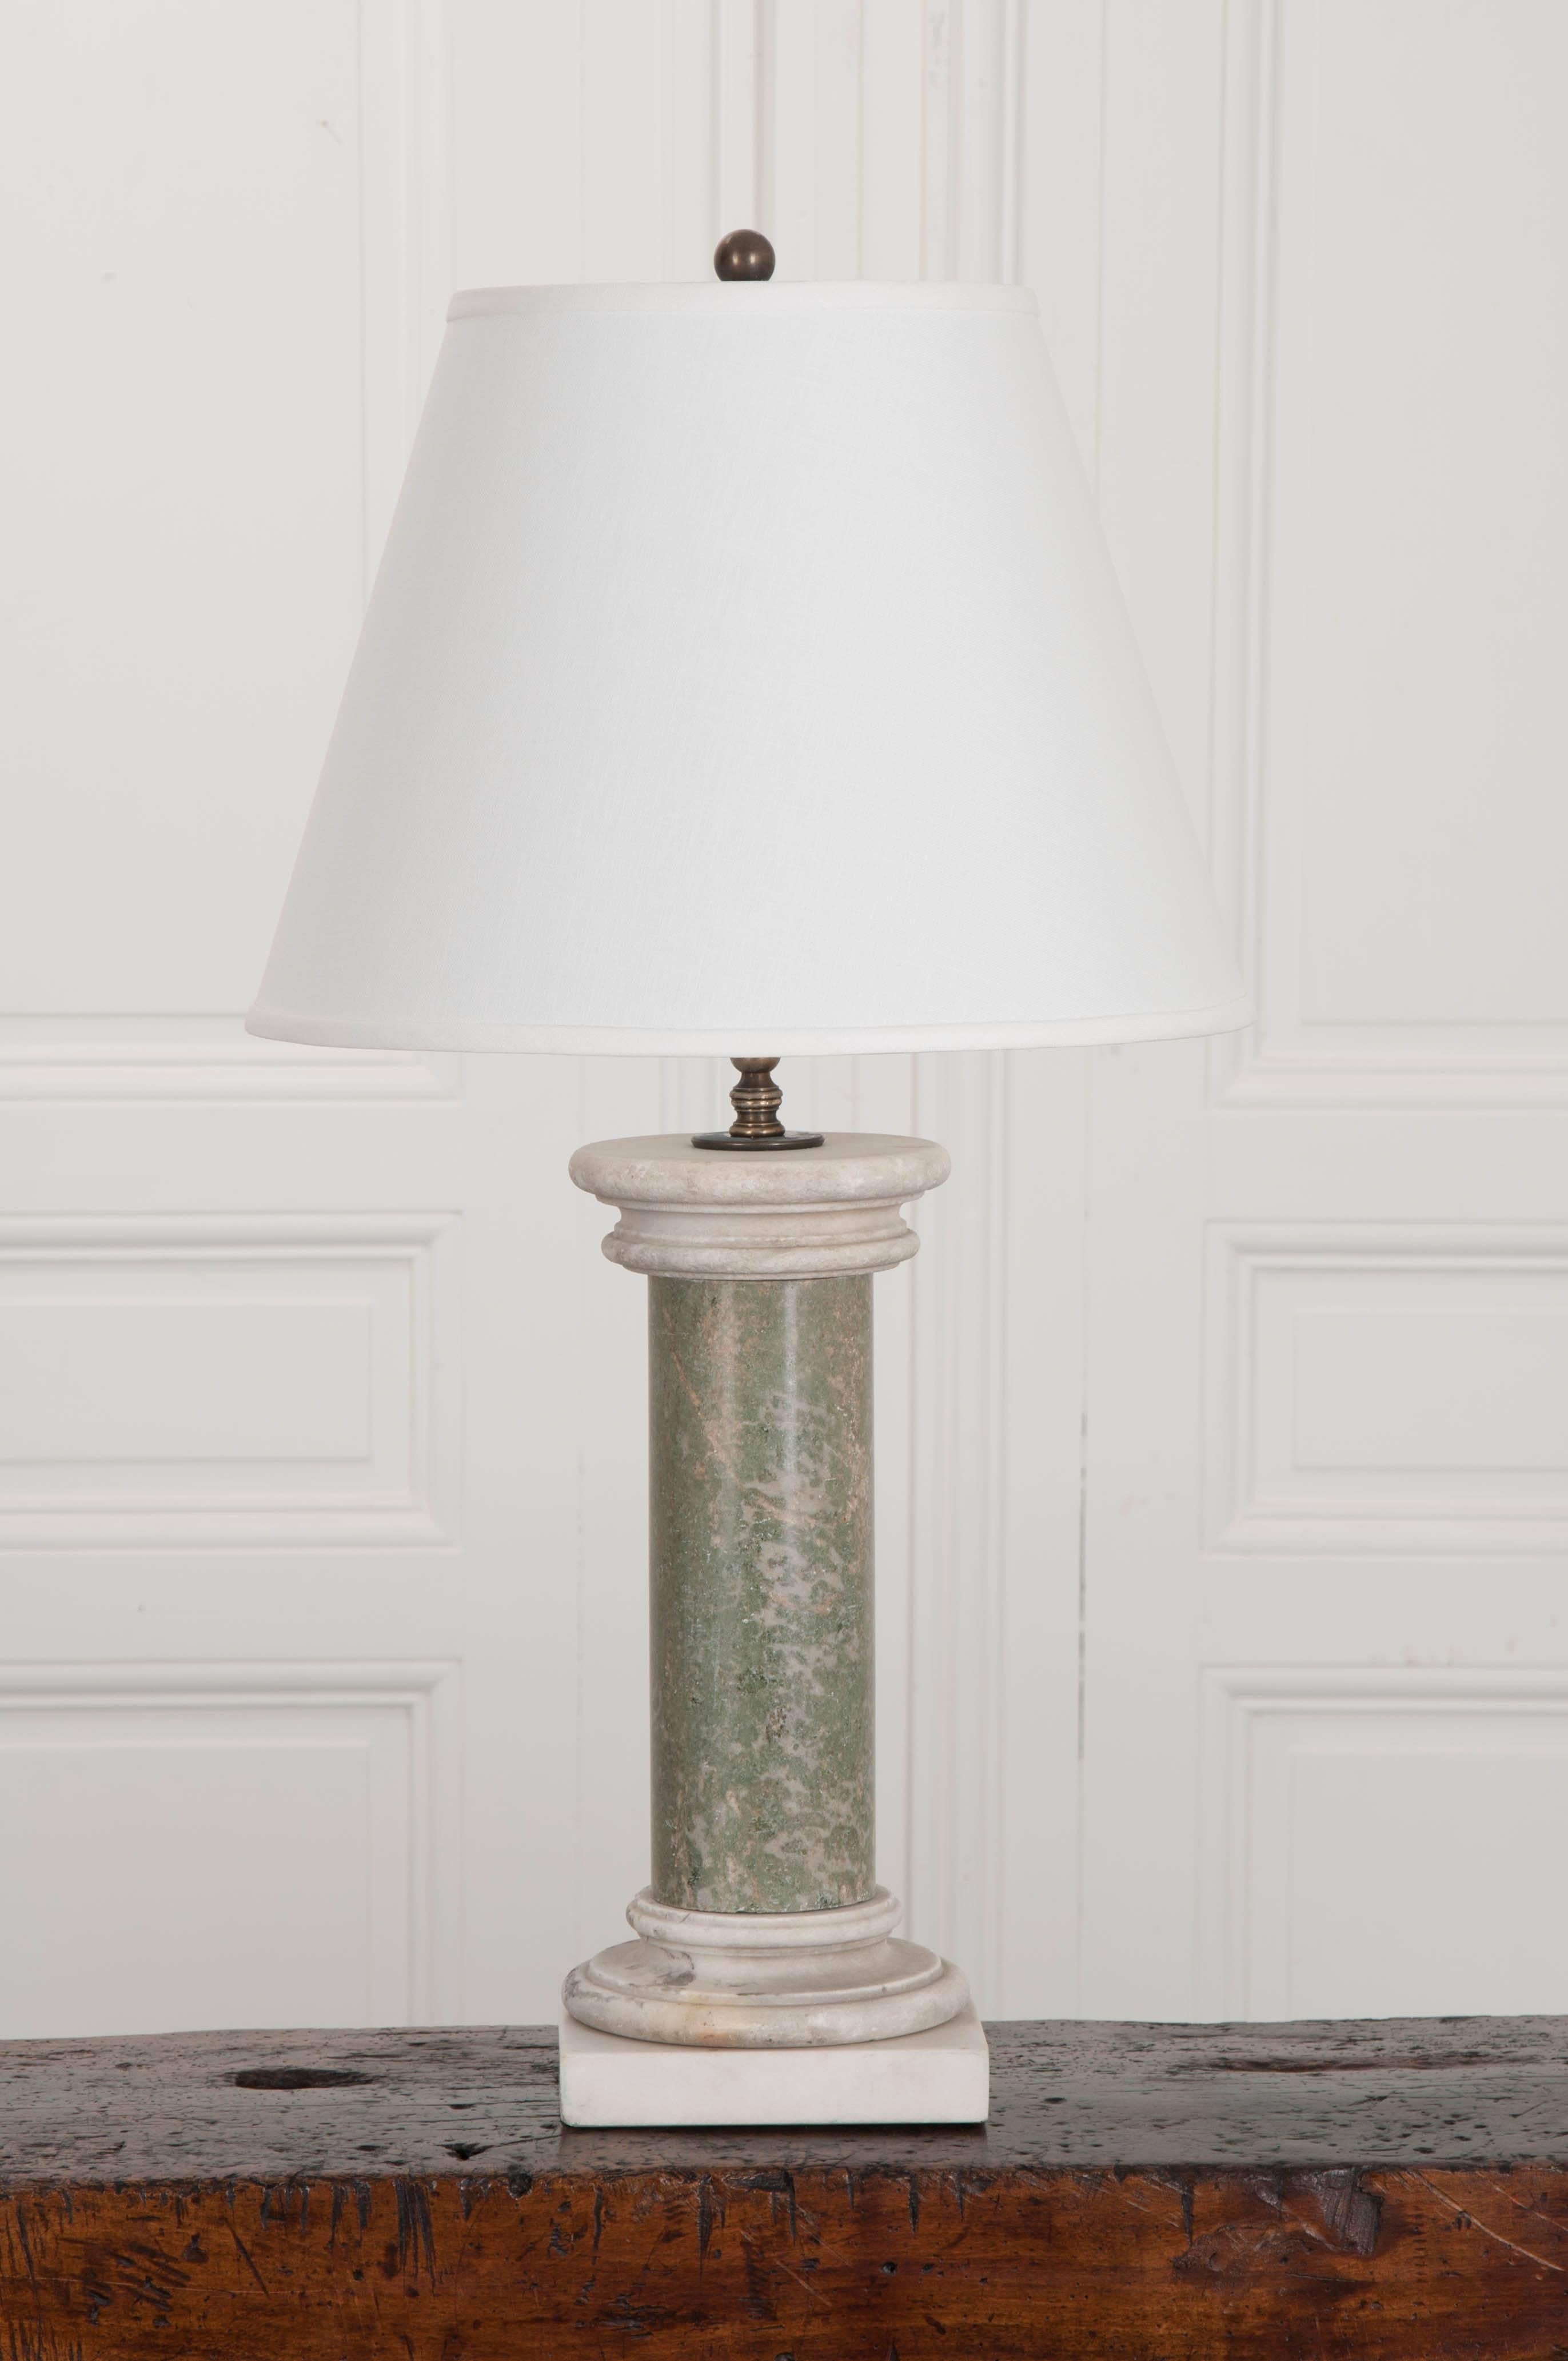 This custom light fixture was made using a column-form baluster from a grand 19th century French marble staircase. The marble is a wonderful pale Kiwi green with natural and grey-colored veins. The capital and base are also made of marble, however